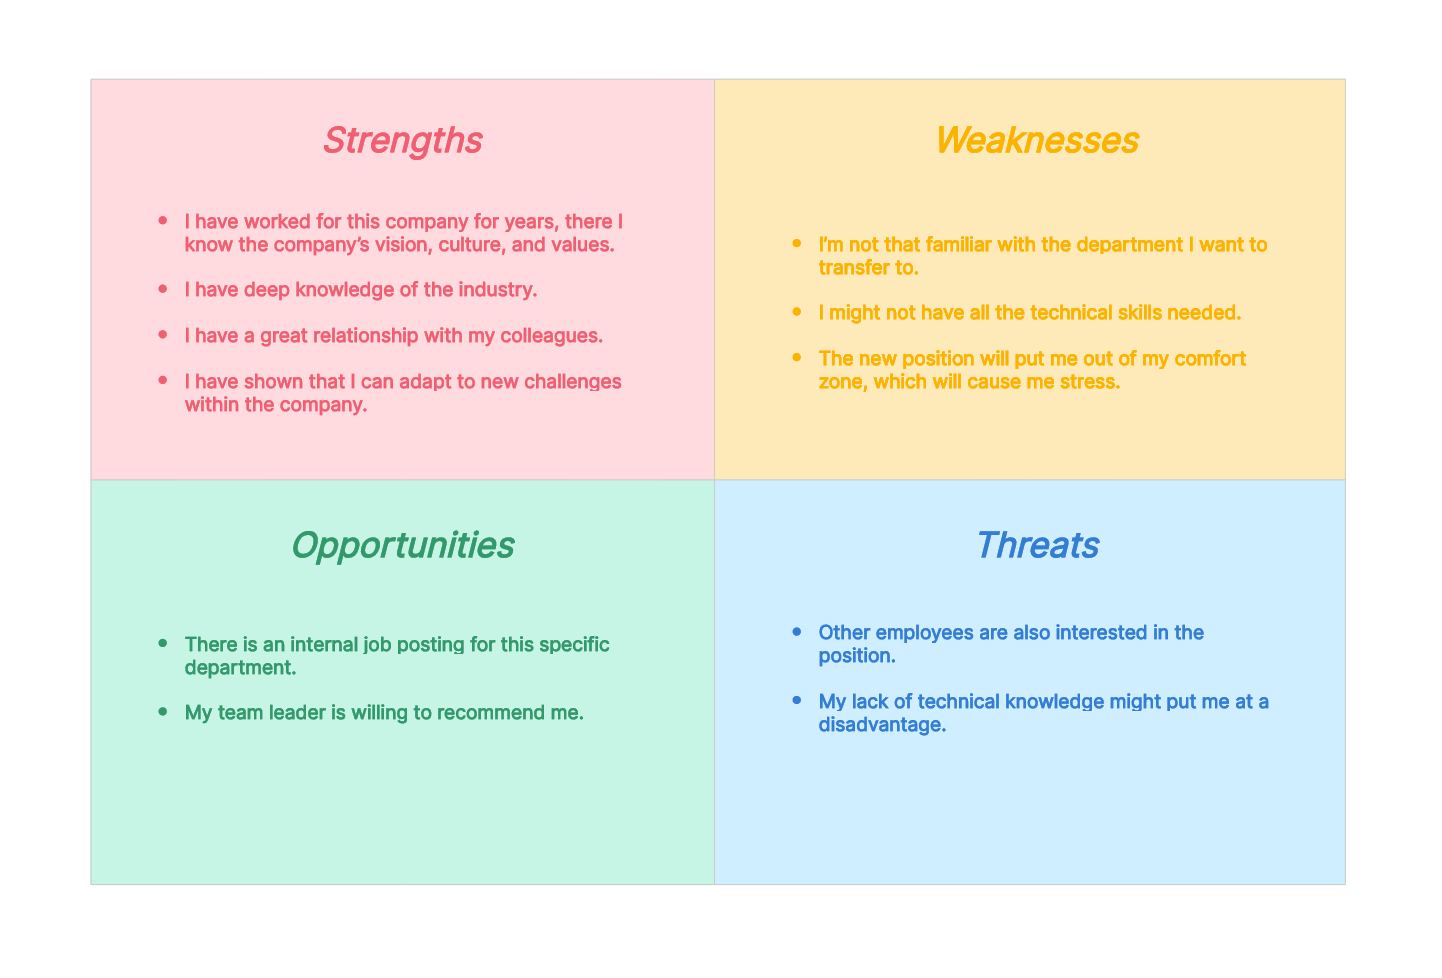 personal-swot-analysis-example-05